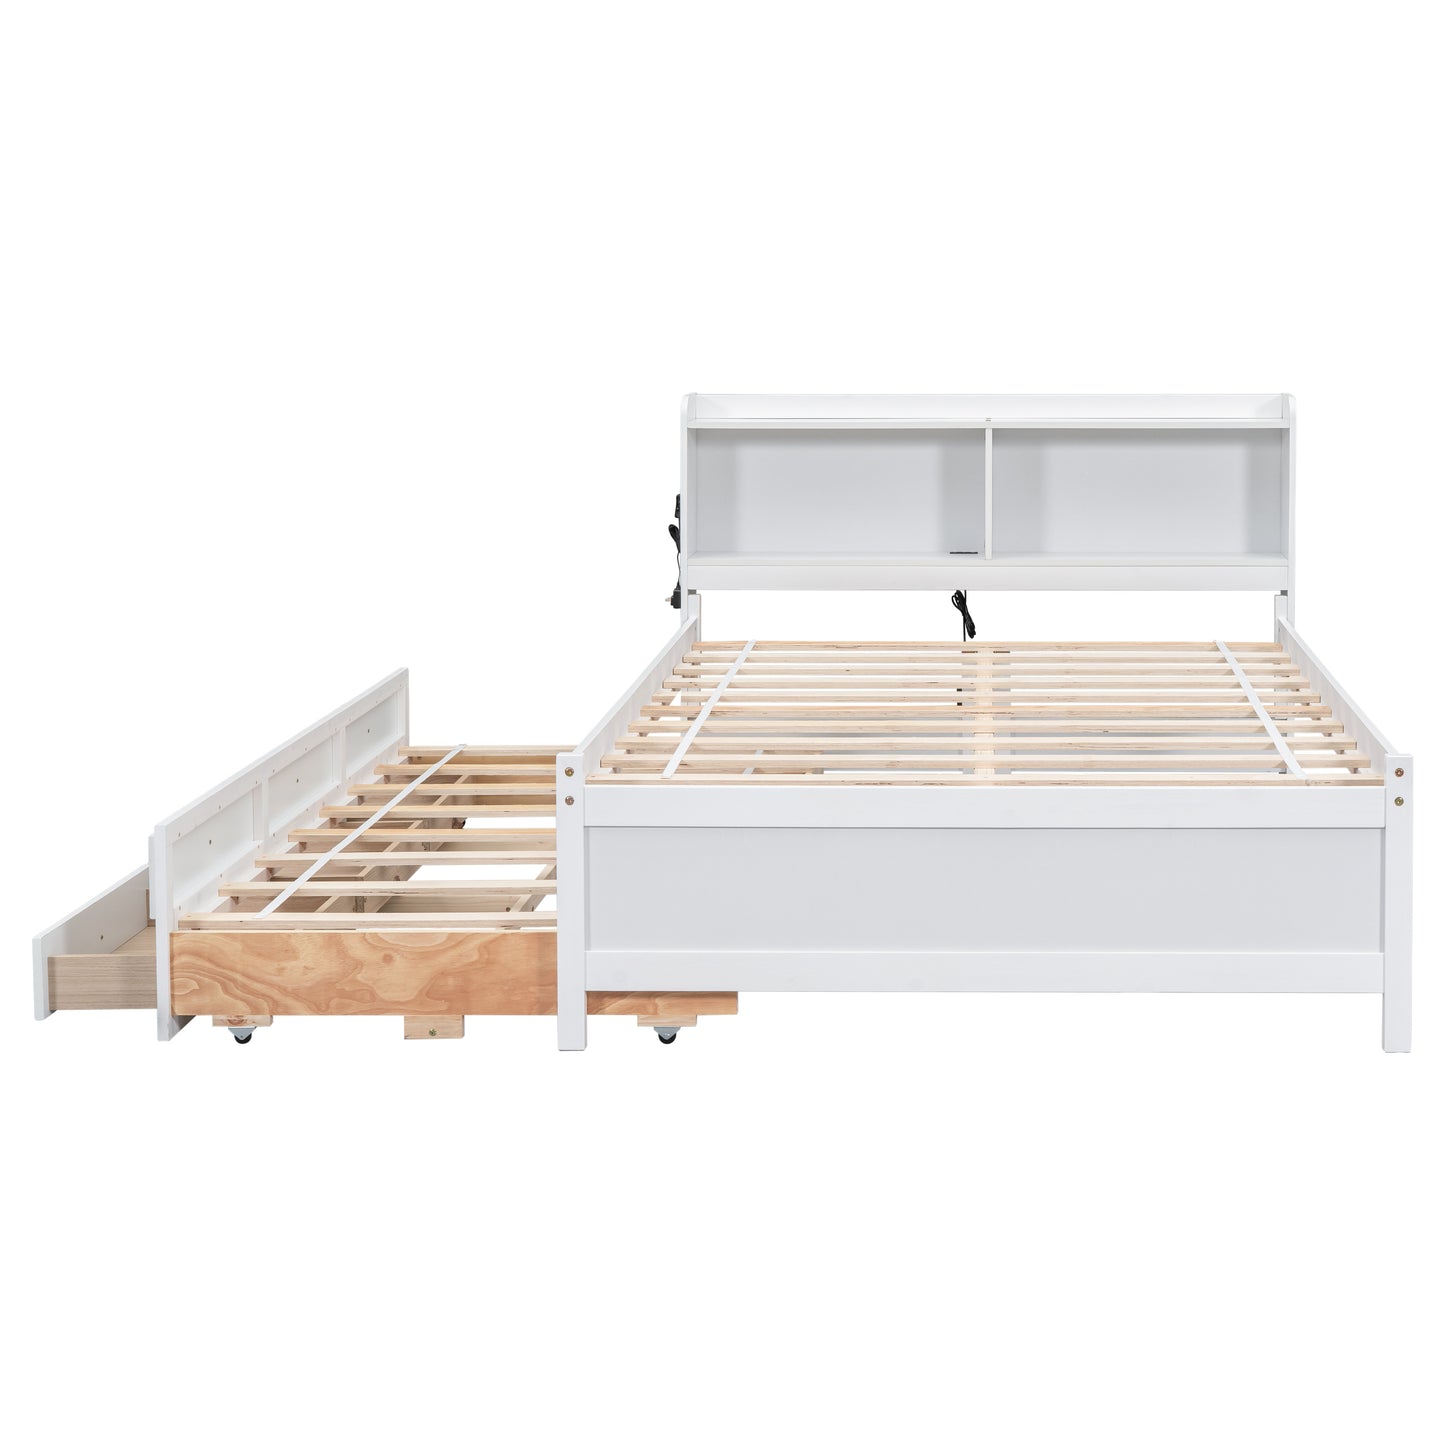 Full Size Platform Bed with USB & Type-C Ports, LED light, Bookcase Headboard, Trundle and 3 Storage Drawers - White